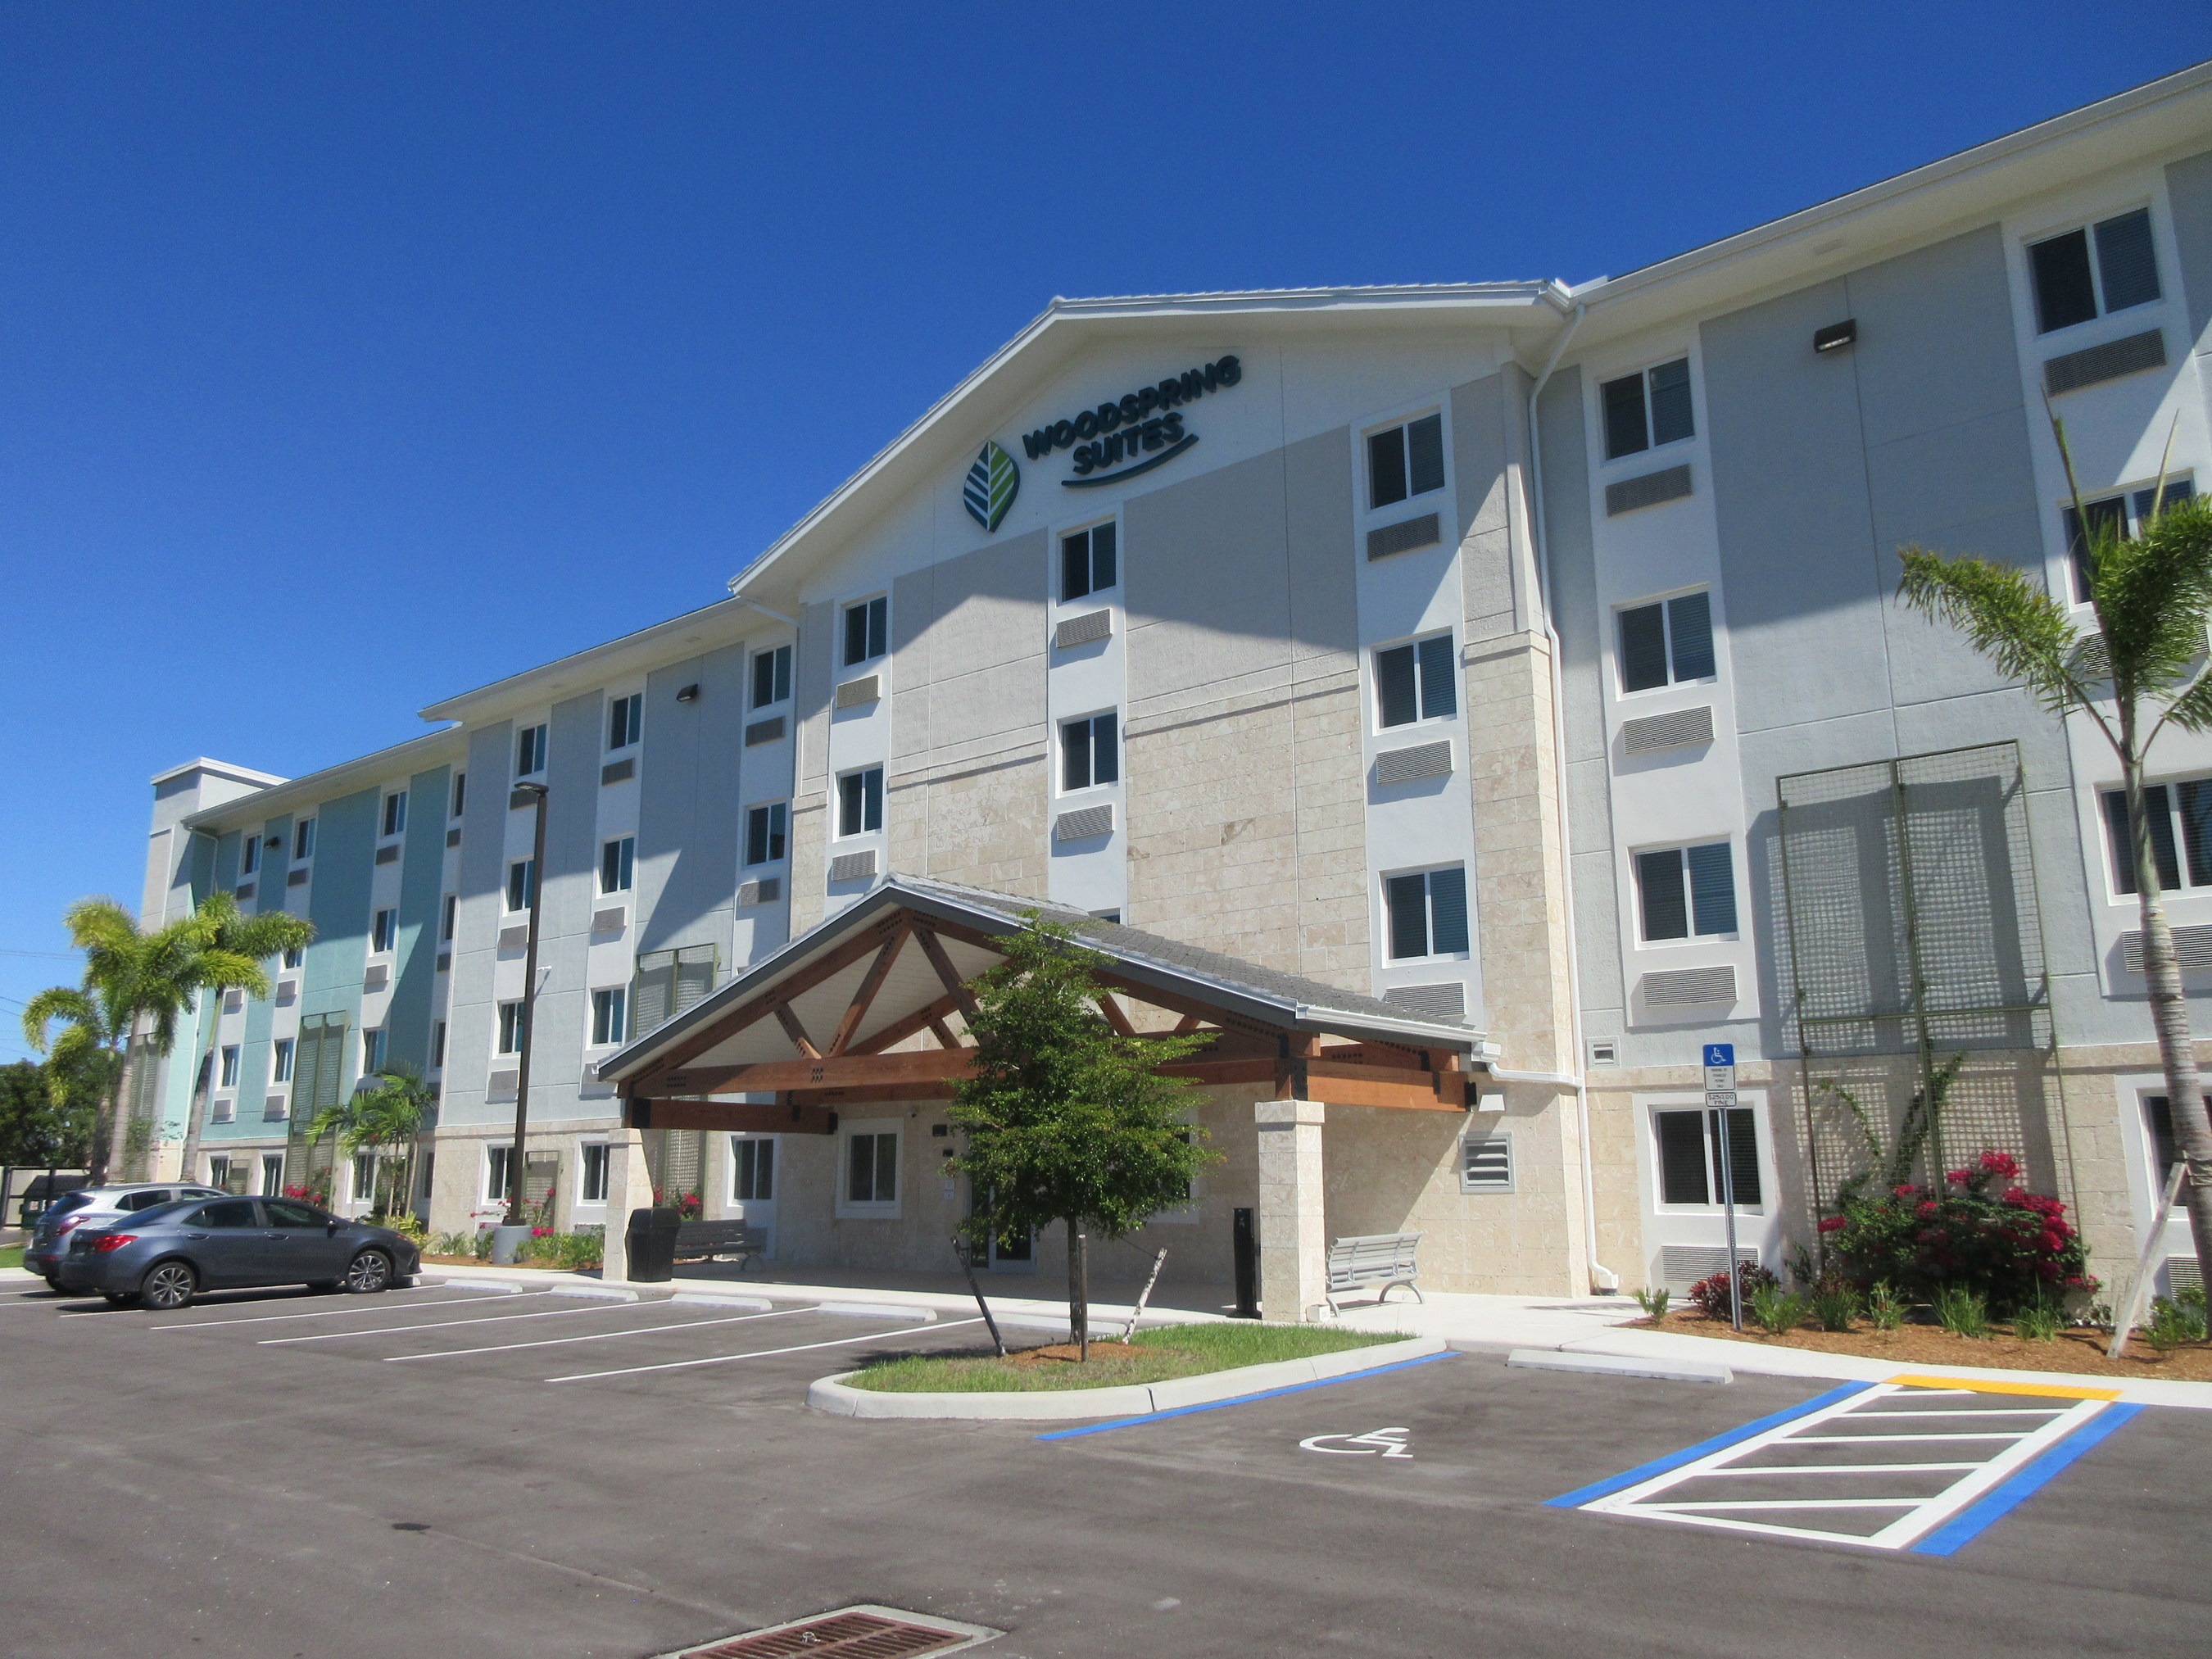 The Naples hotel is the second WoodSpring Suites location opened by Gold Coast Premier Properties joining the WoodSpring Sui